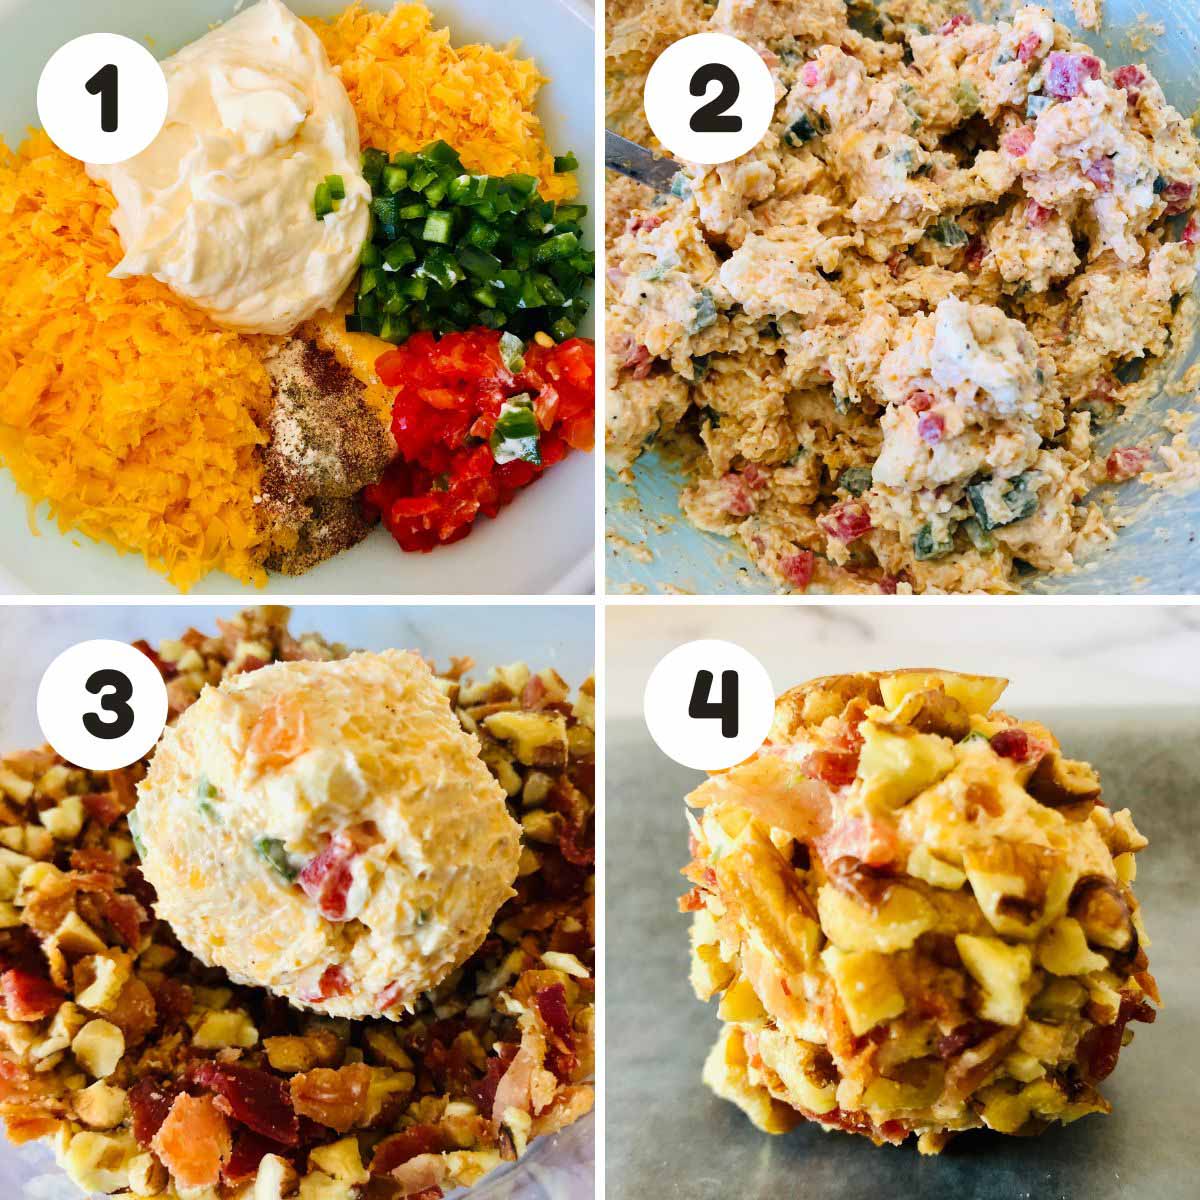 Steps to make the cheese balls.